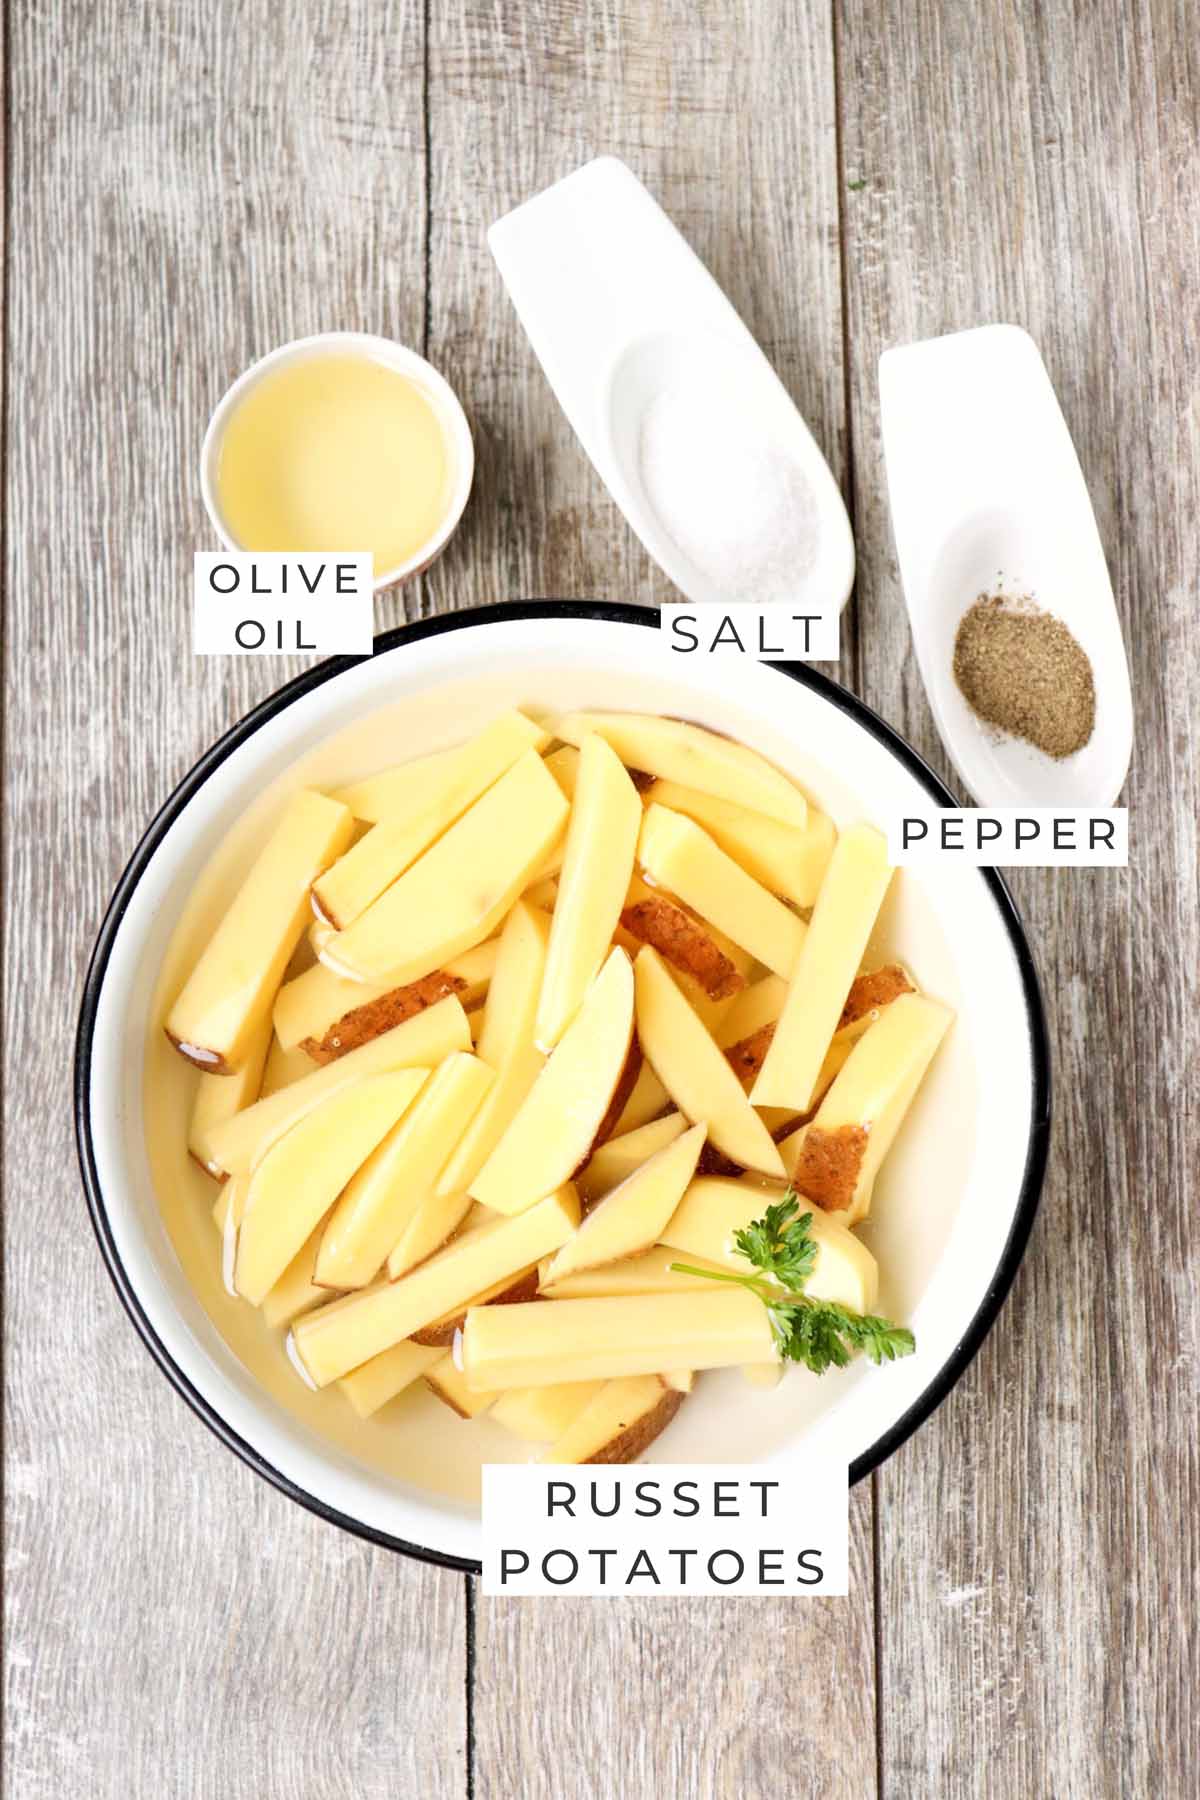 Labeled ingredients for the fries.